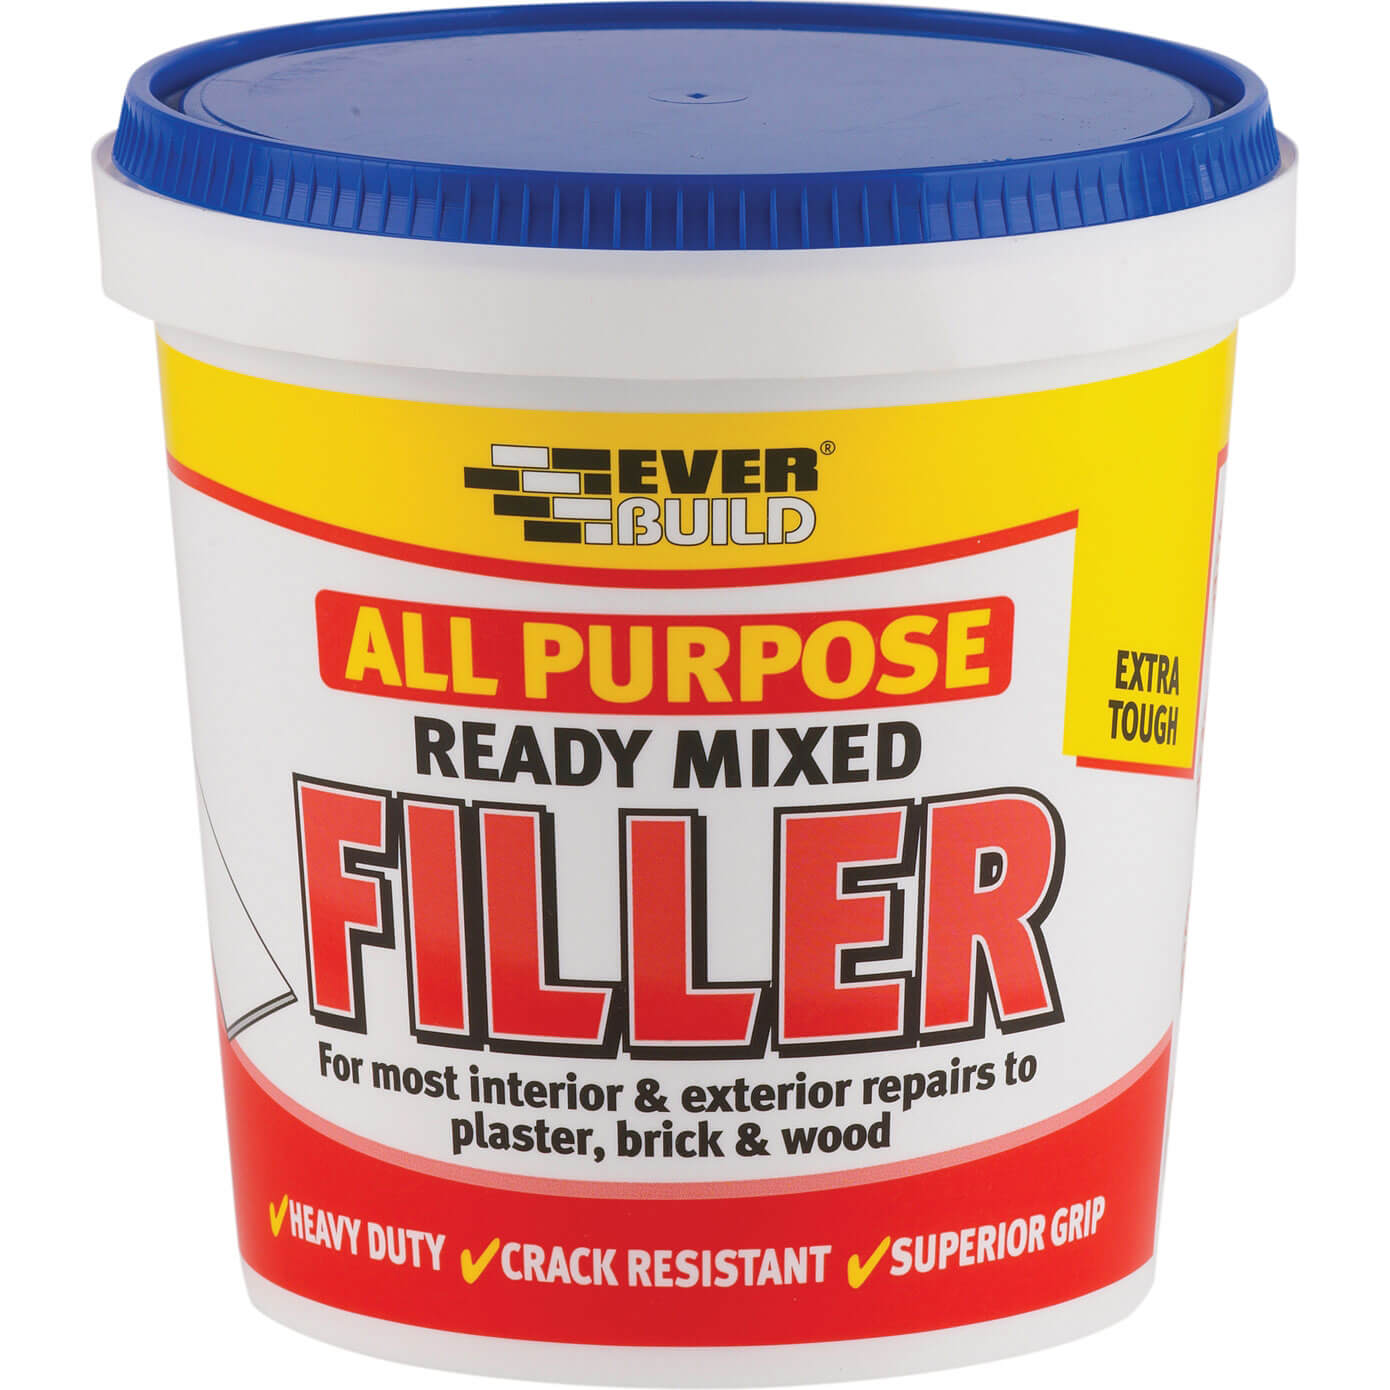 Image of Everbuild All Purpose Ready Mixed Filler 1000g